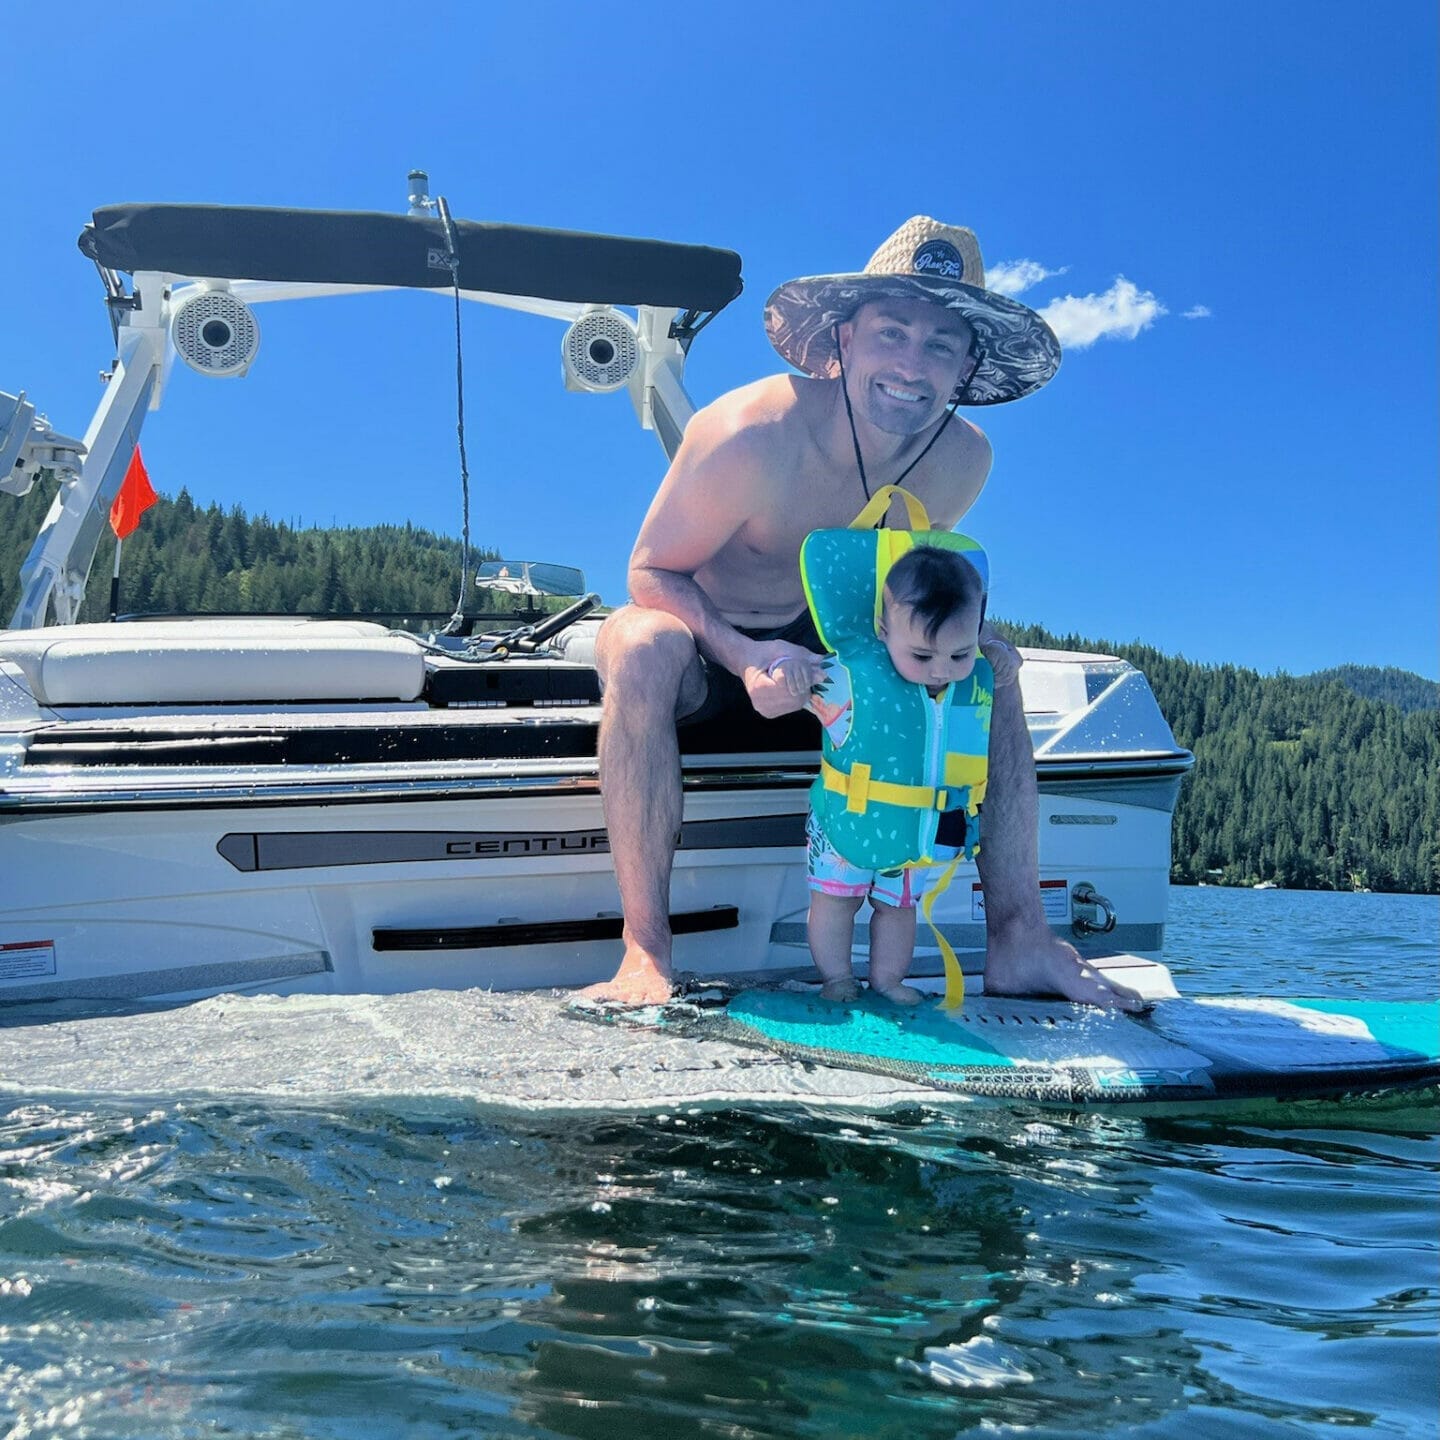 A man and a baby on a wakesurf board in the water.